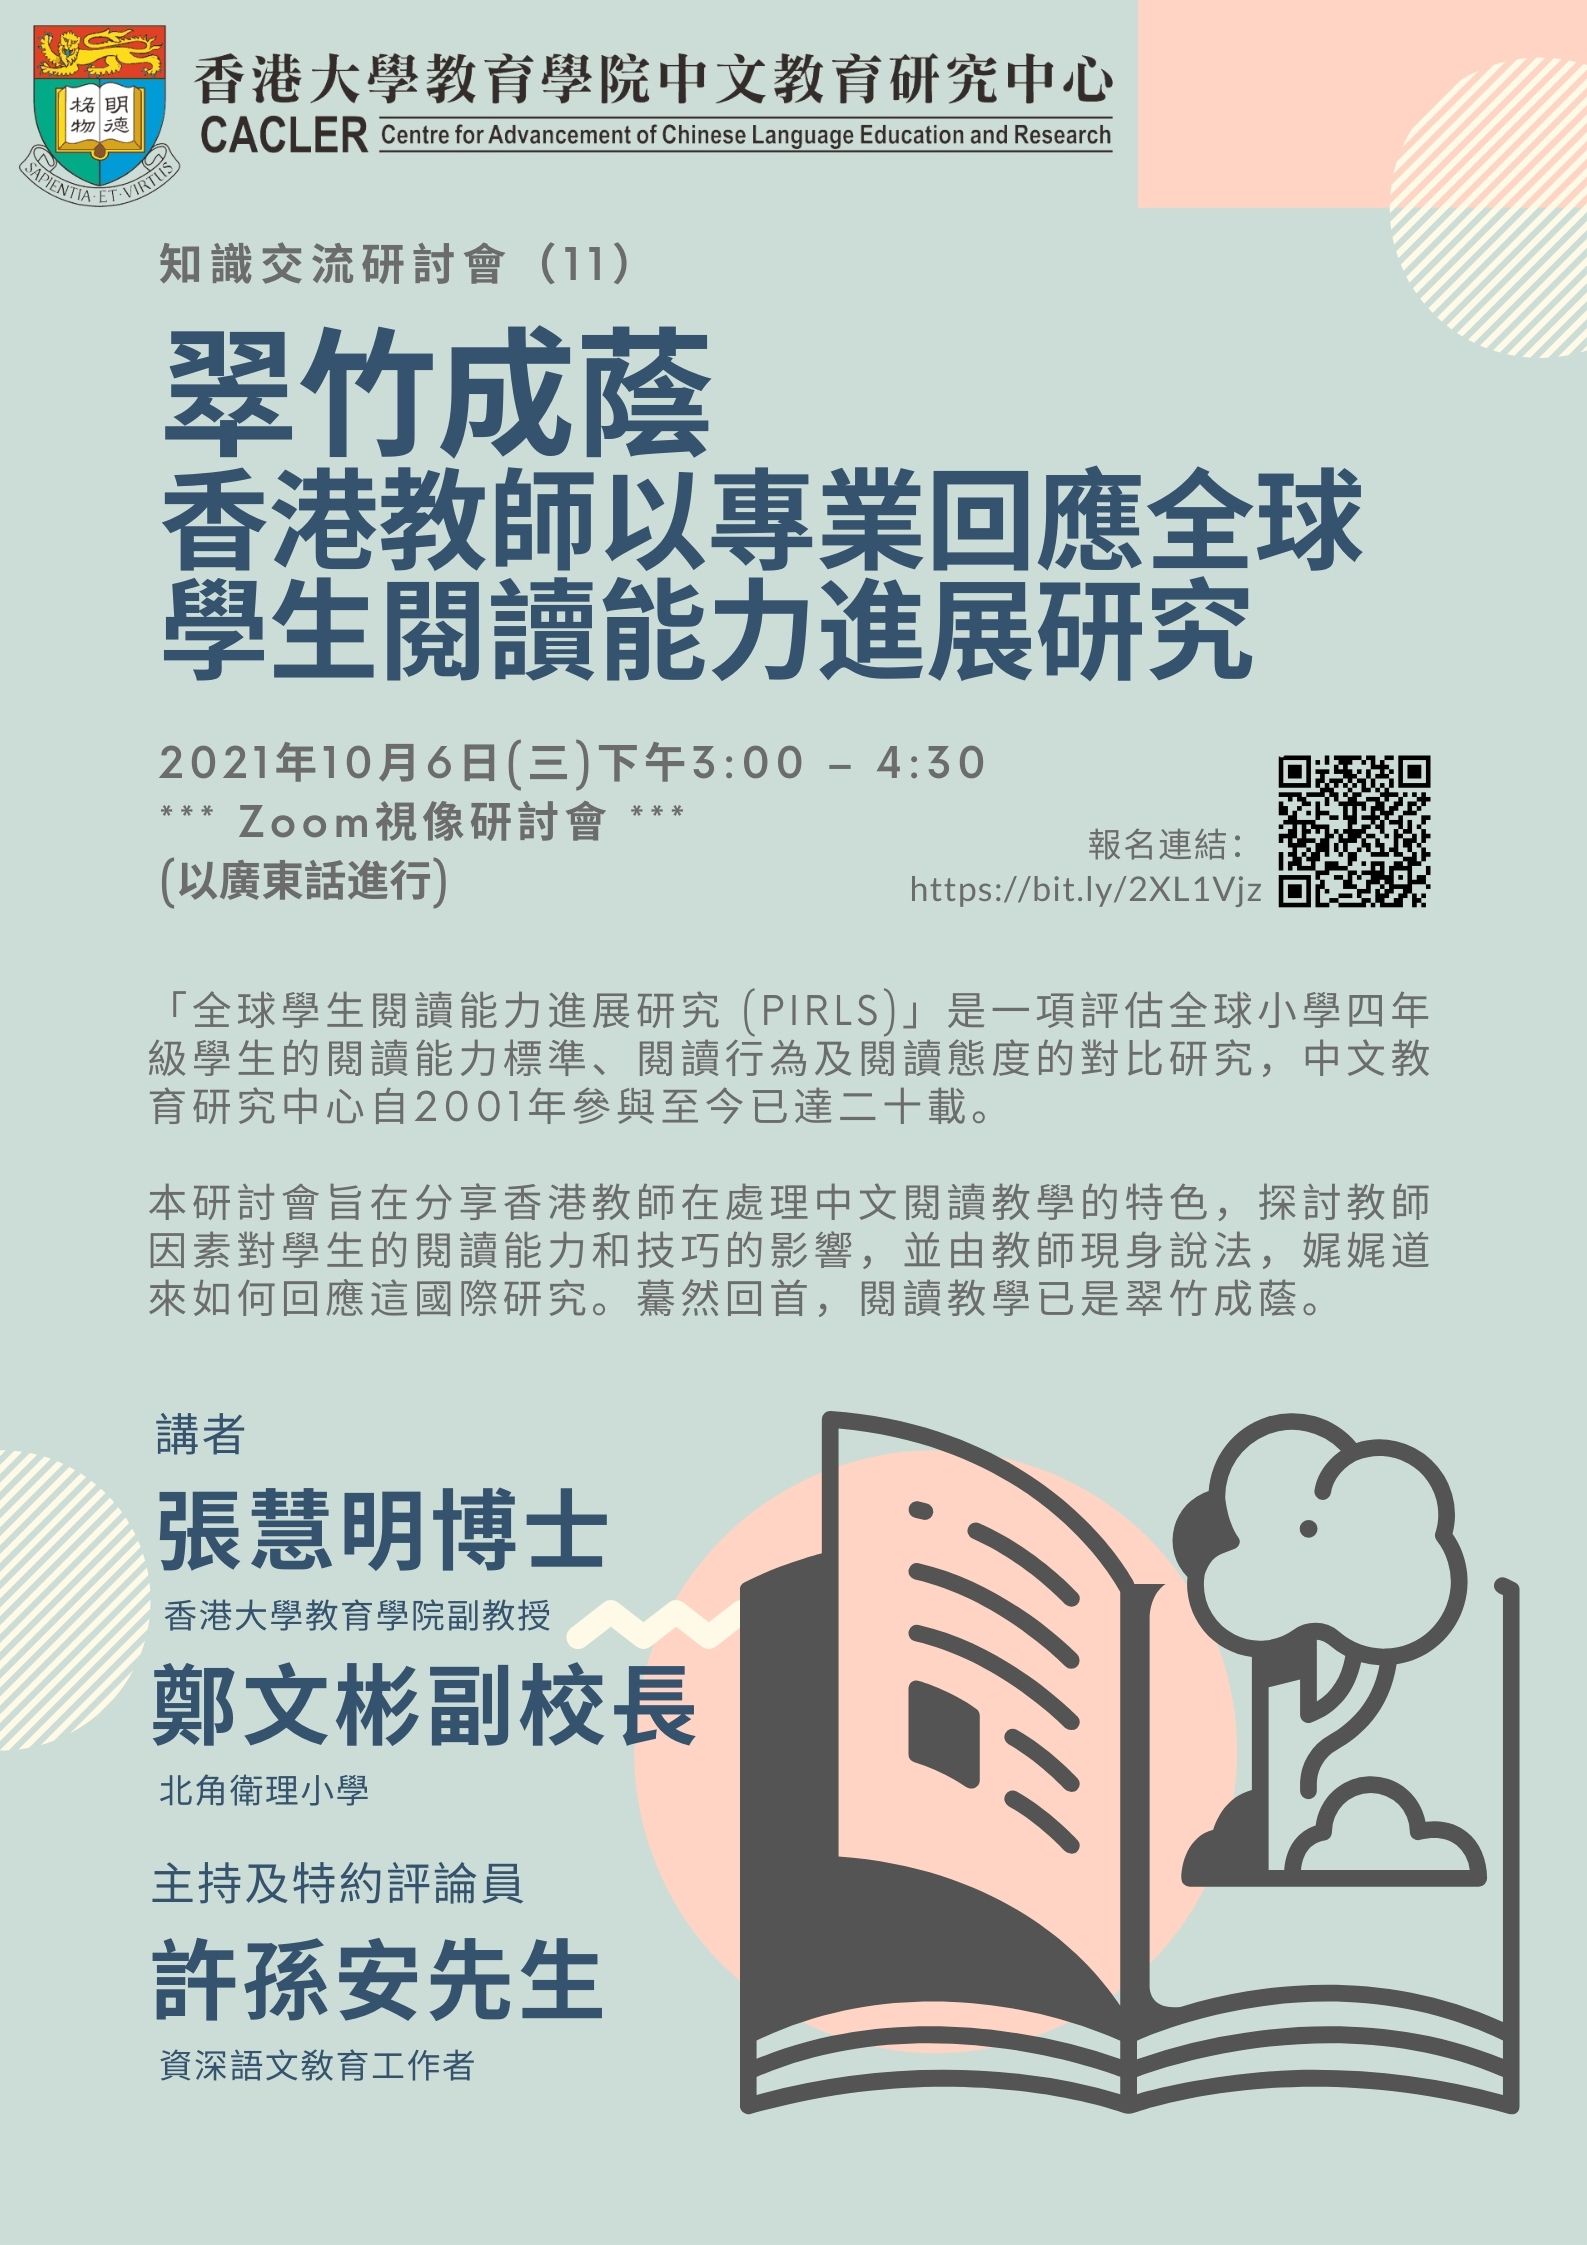 The Bamboo Blossom: Responding PIRLS with Hong Kong teachers’ professionalism title